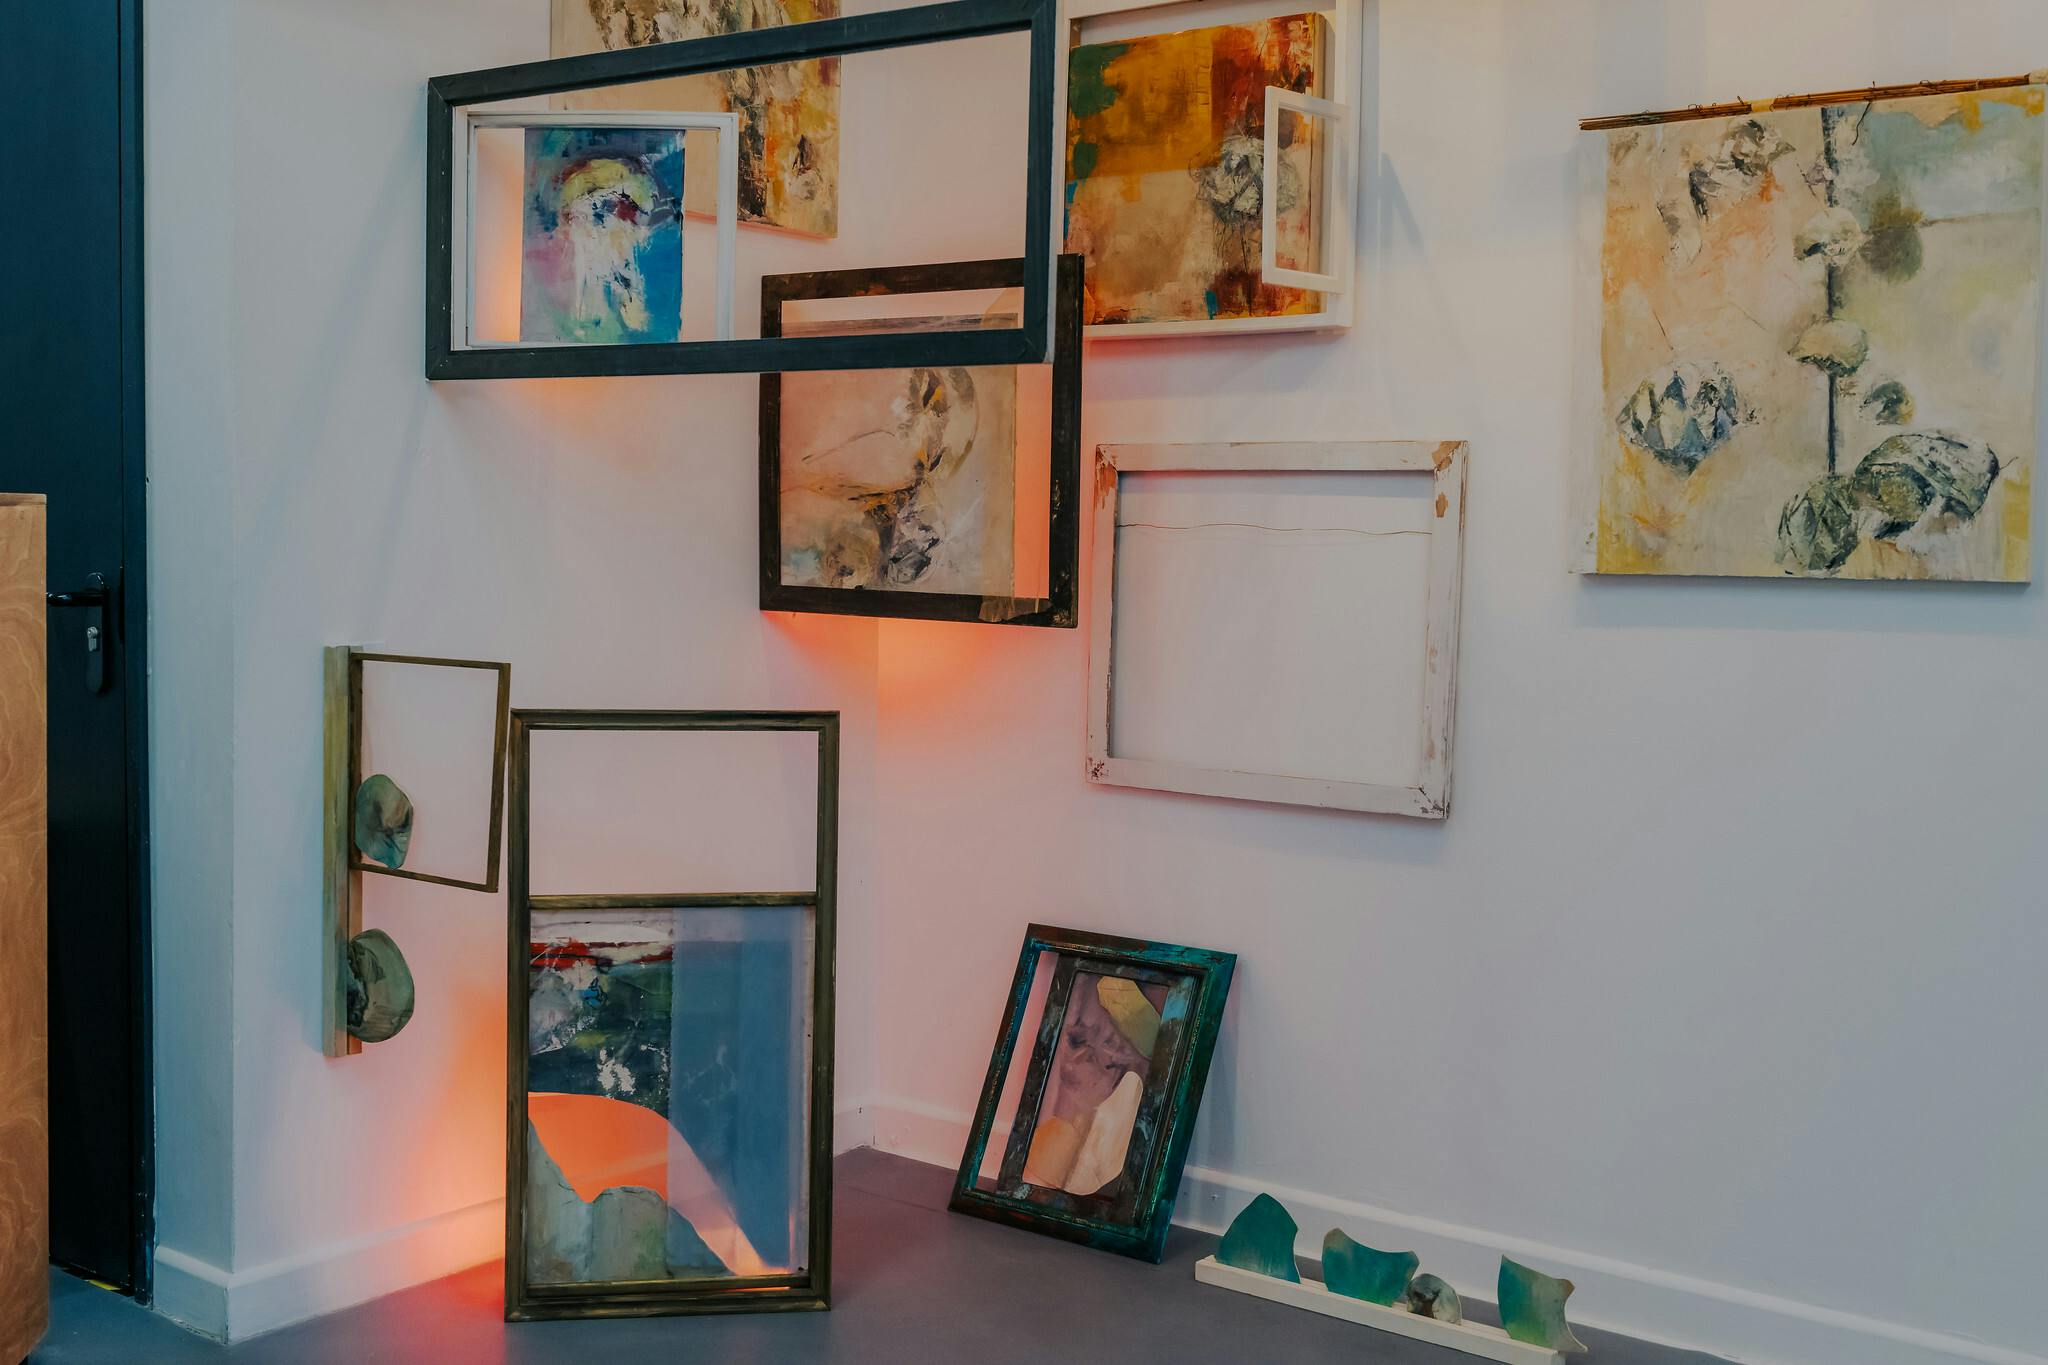 A number of paintings and frames backlit and positioned in a corner of a space with white walls and soft orange lighting